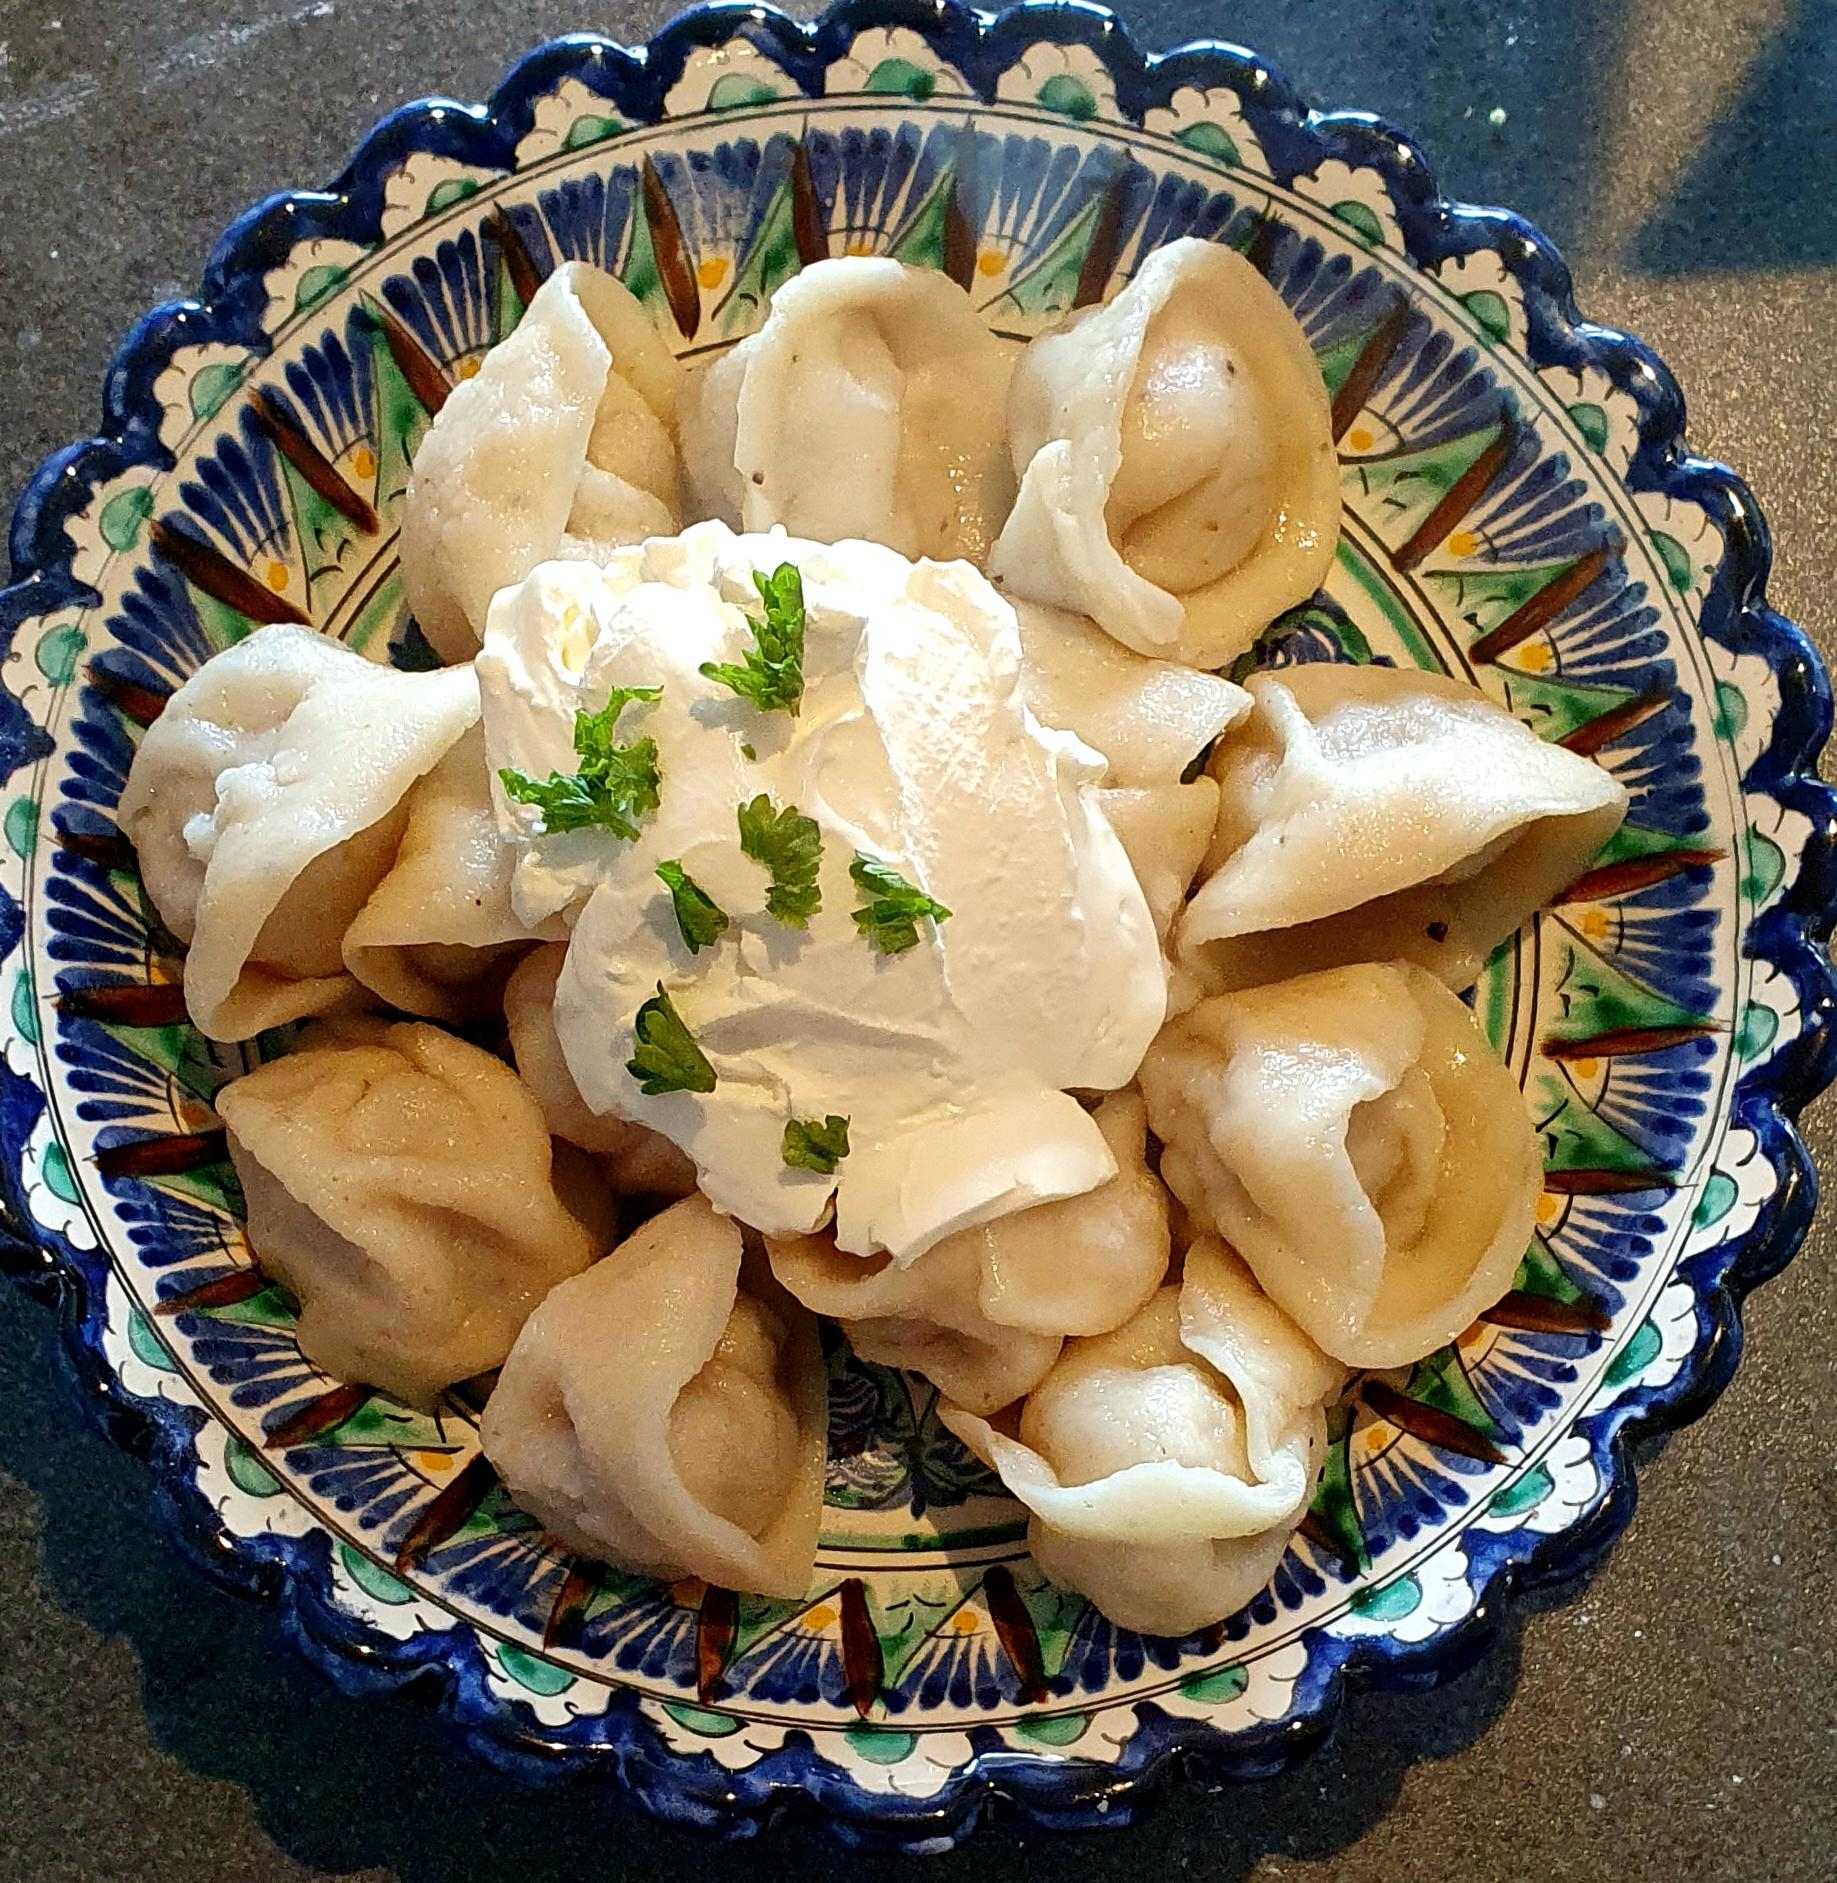 A plate of dumplings topped with sour cream and garnished with herbs